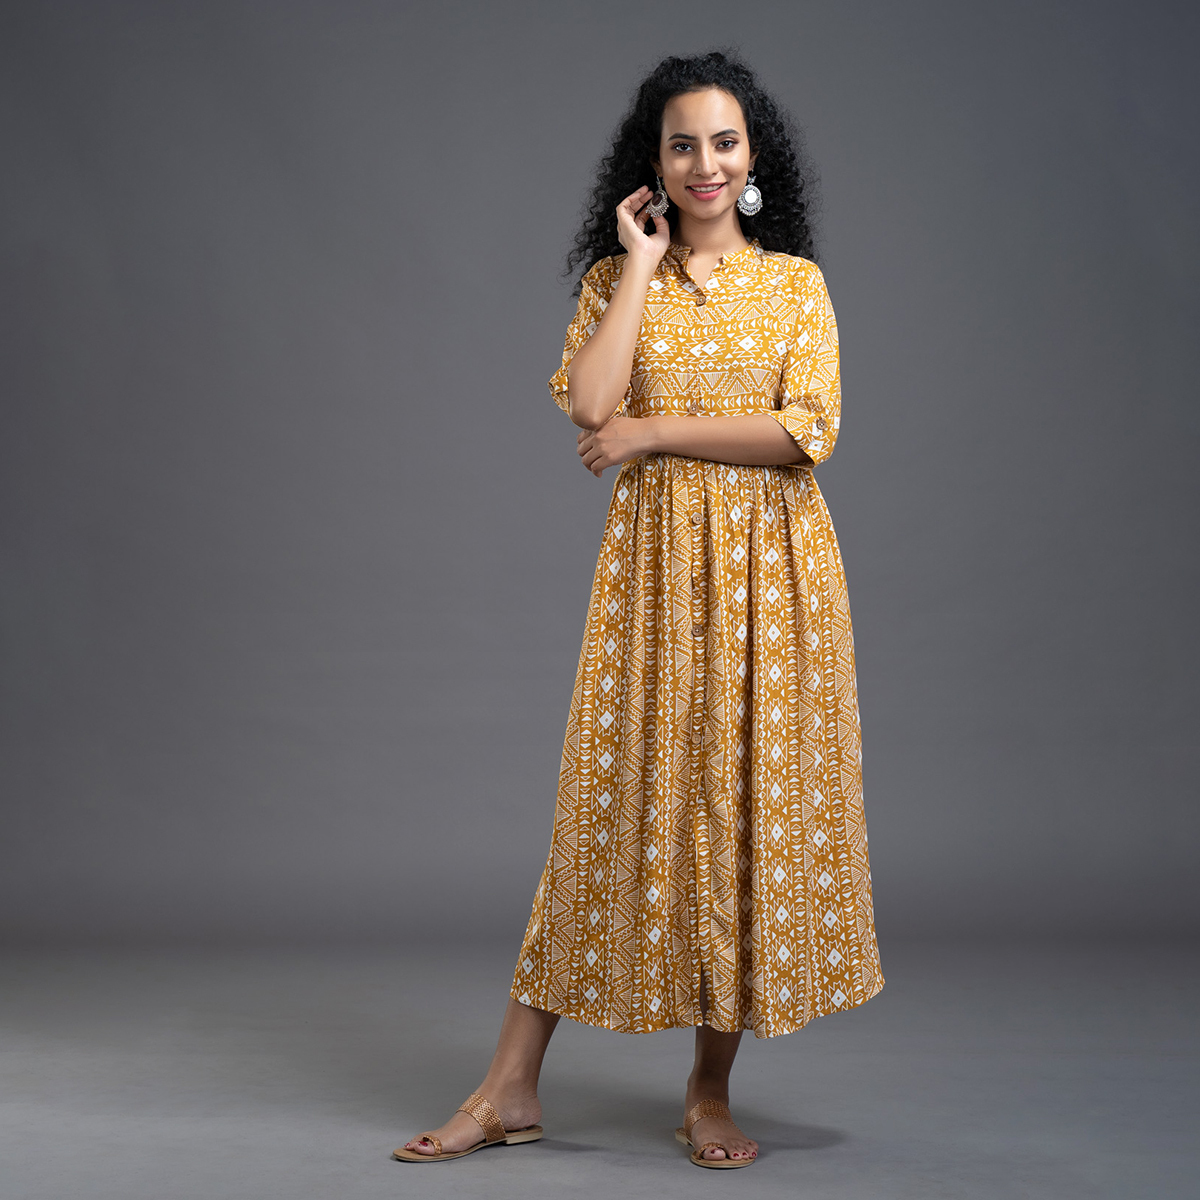 Zella Geometrical Printed Rayon Ankle Length Dress with Mandrin Collar & Front Buttoning with Slit - Mustard